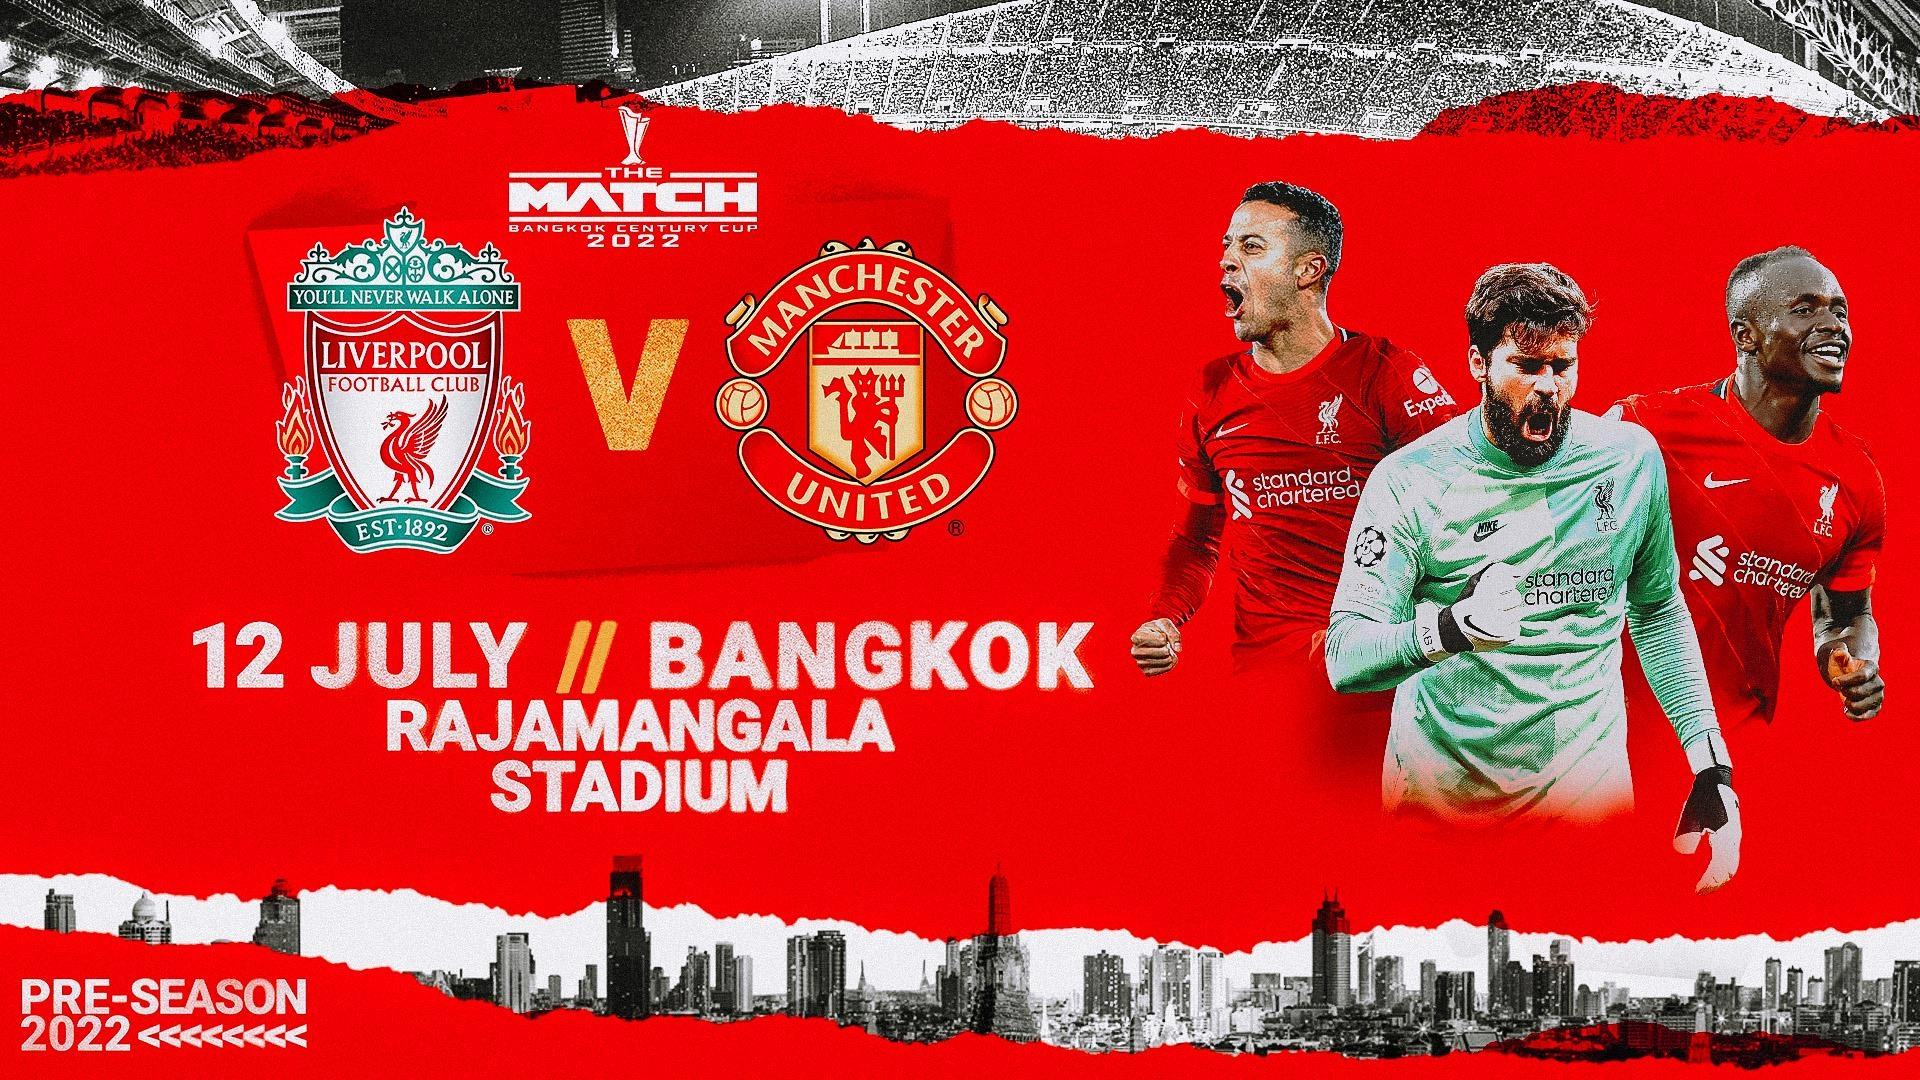 Liverpool FC - Pre-season: Liverpool to take on Manchester United in Bangkok